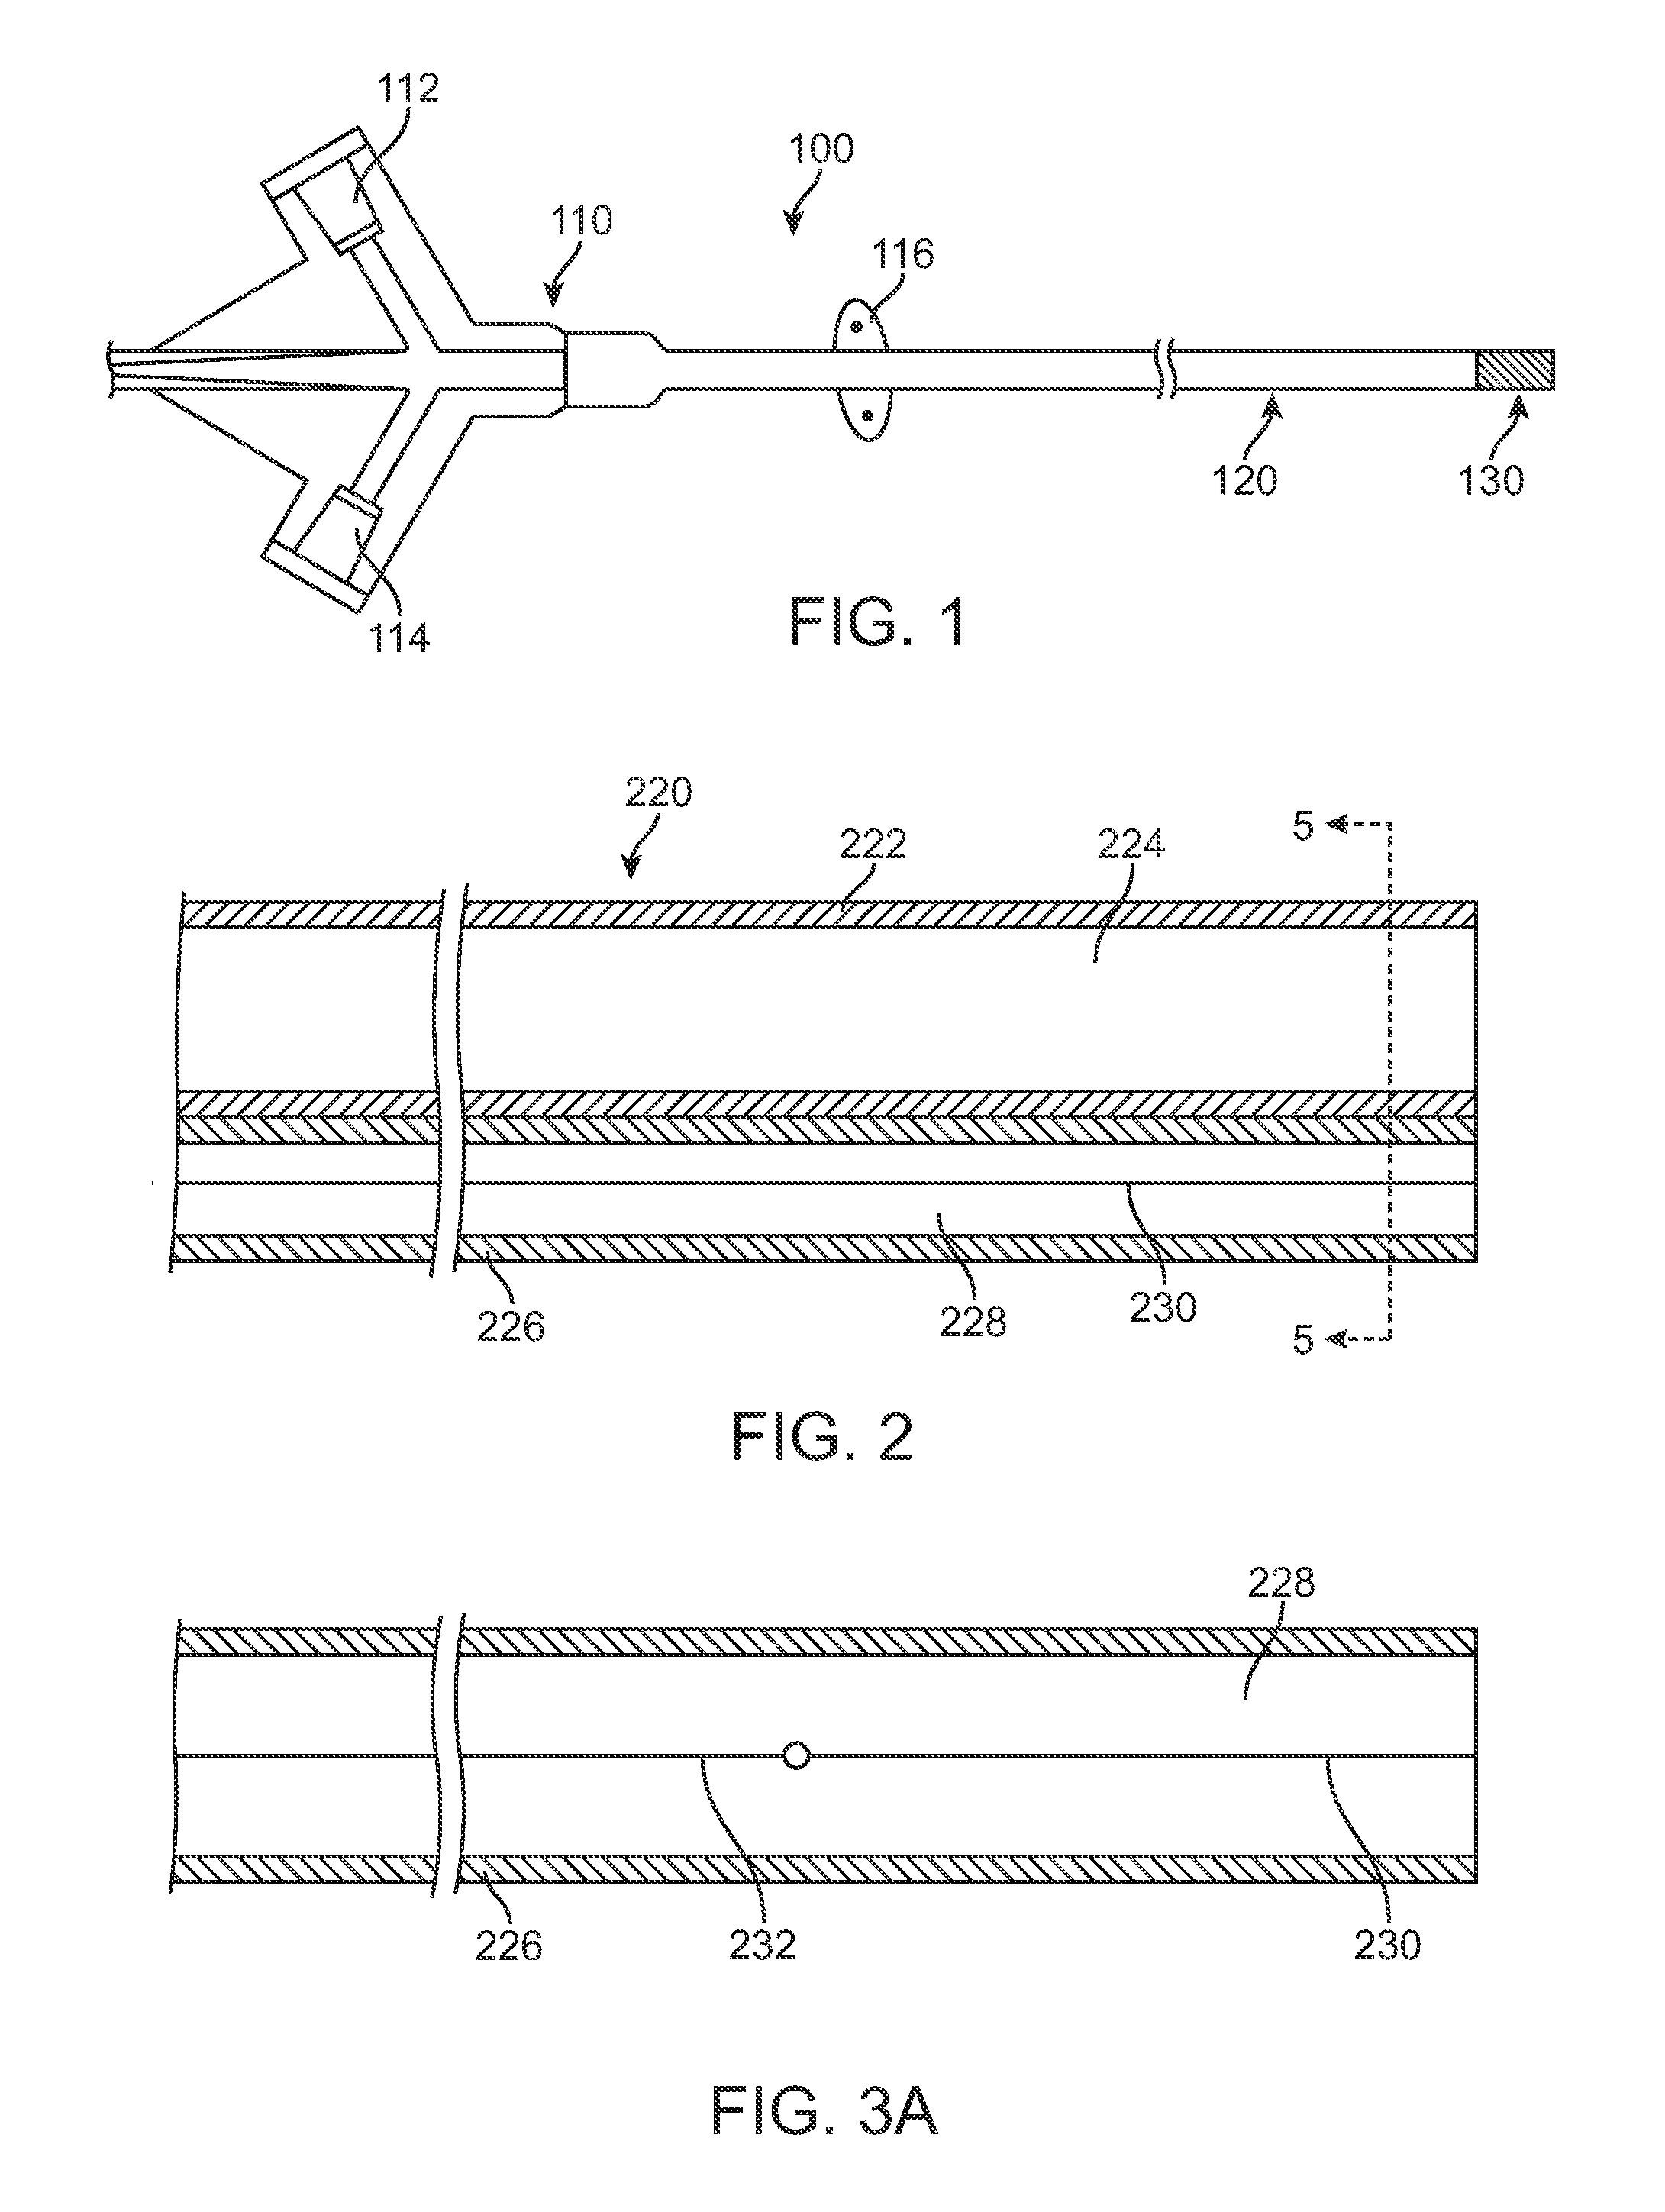 Indwelling Temporary IVC Filter System with Aspiration